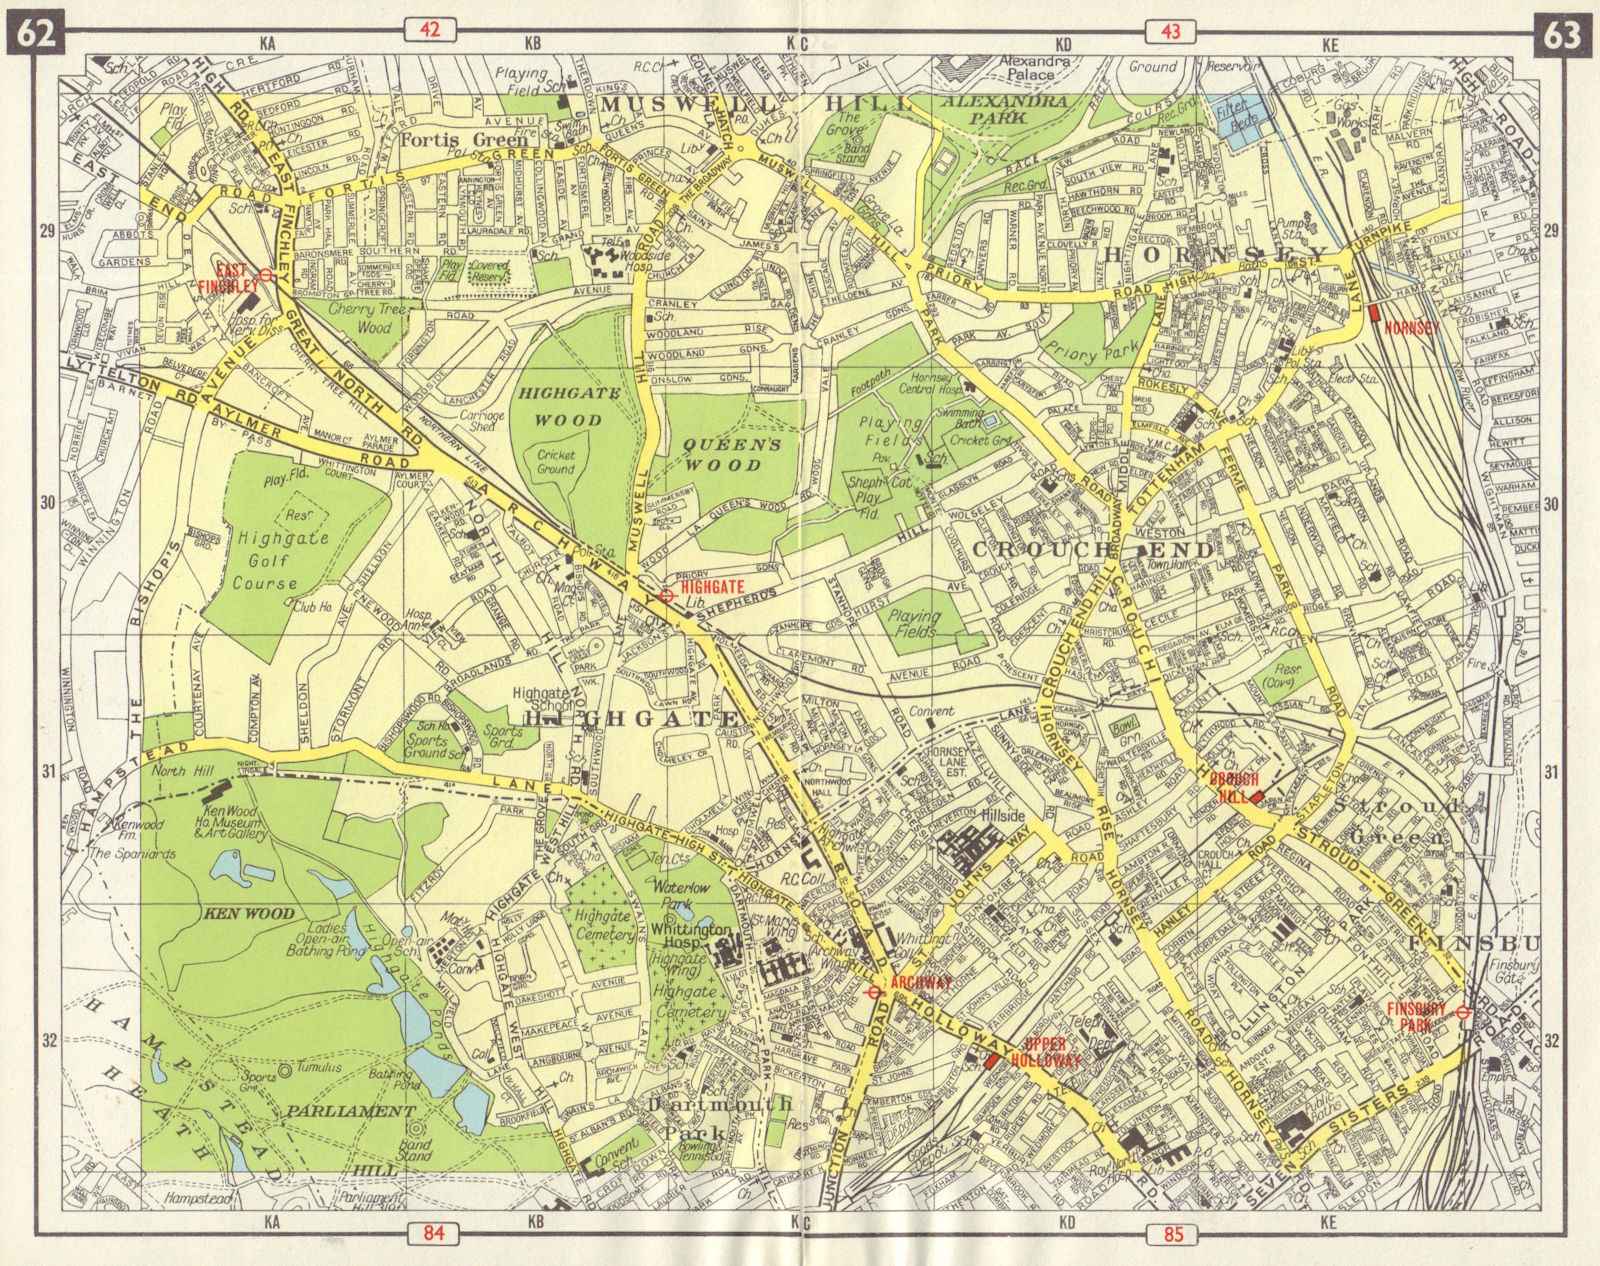 N LONDON Muswell Hill Hornsey Stroud Green Crouch End Highgate Finsbury 1965 map